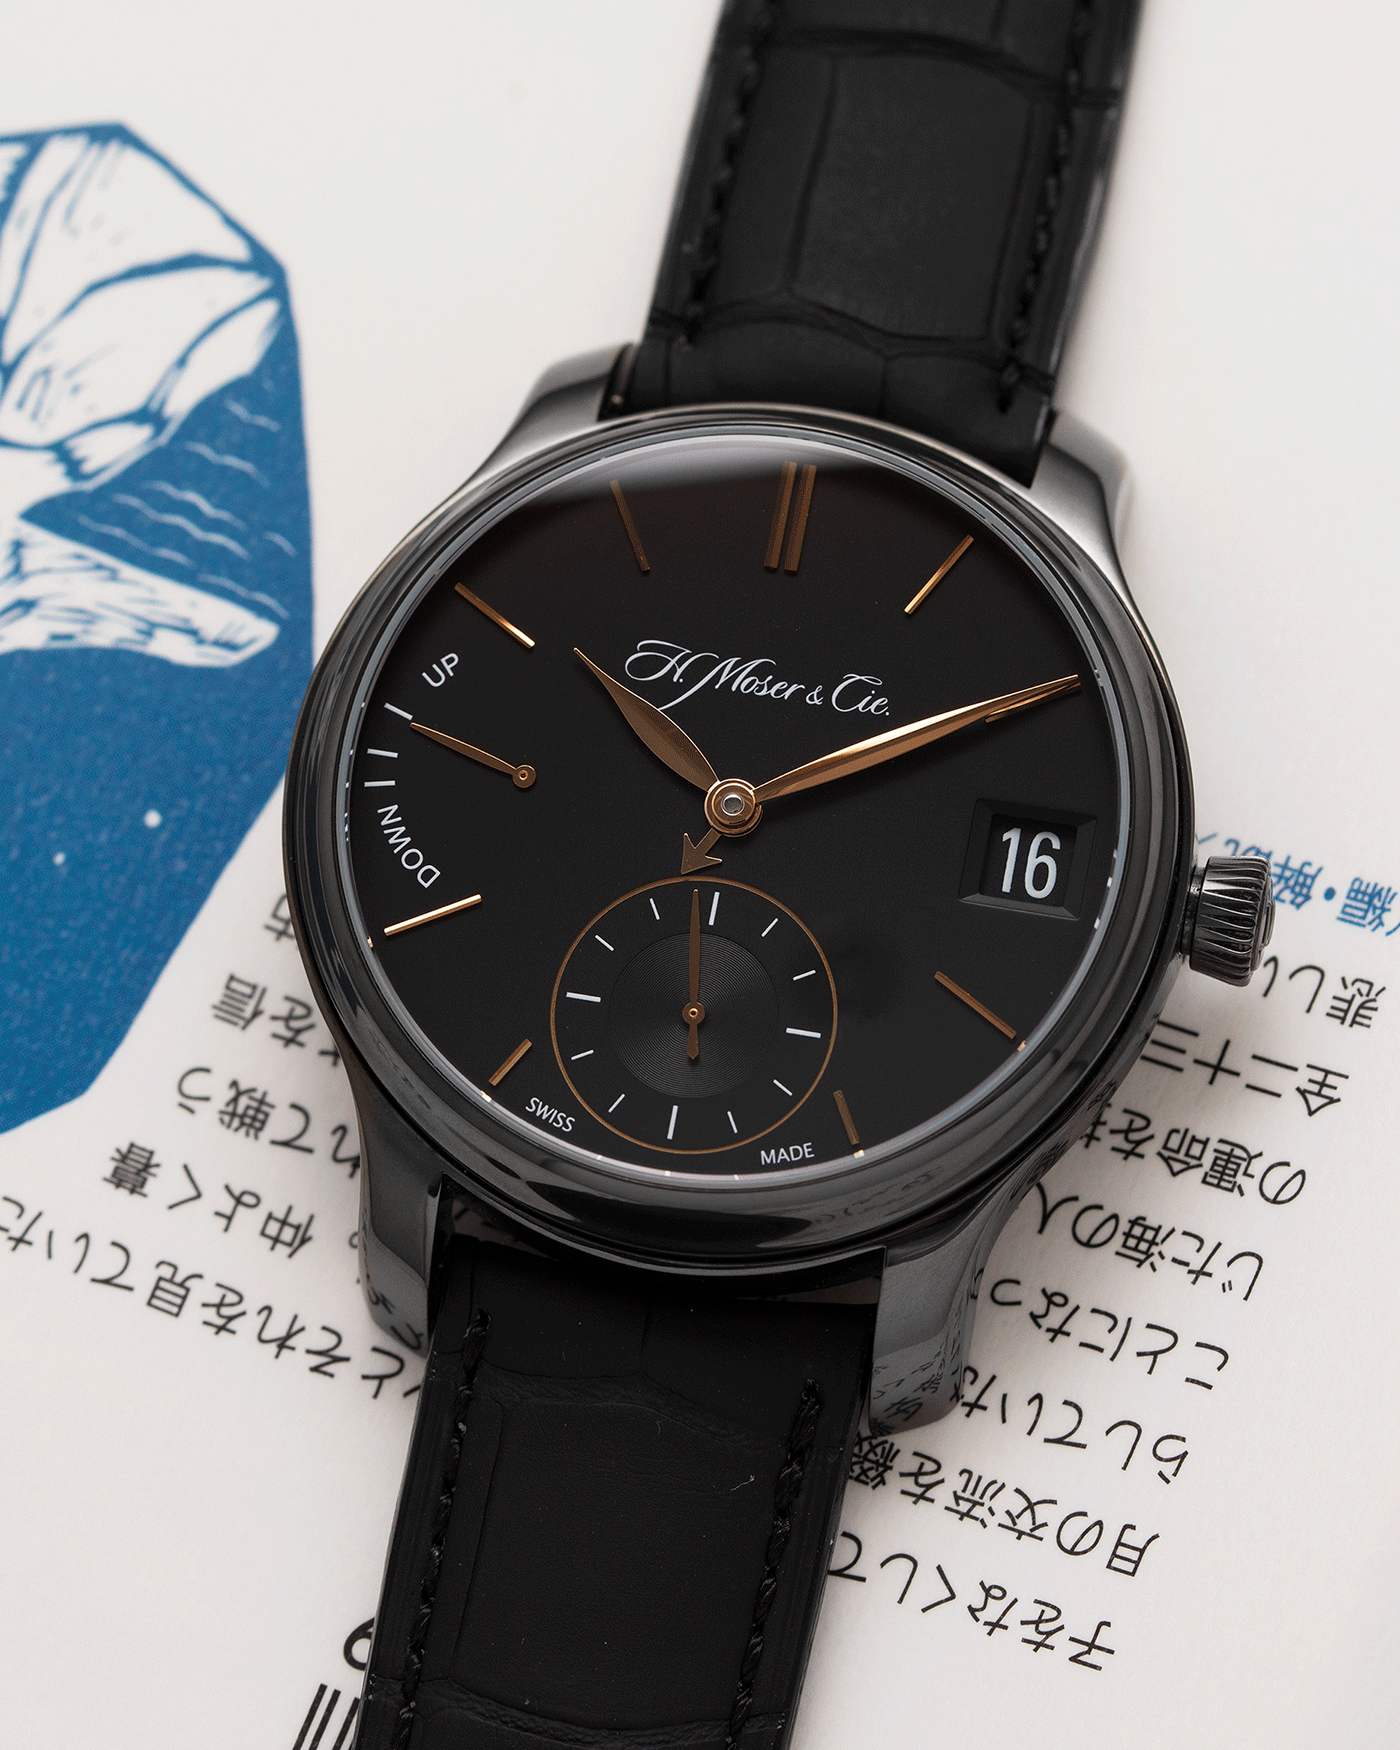 Brand: H.Moser & Cie Year: 2020 Model: Endeavour Perpetual Black Edition Reference Number: 341.050-020 Material: DLC Treated Titanium Movement: Manually wound Caliber HMC 341 Case Diameter: 40.8mm Bracelet/Strap: H. Moser & Cie Black Alligator Leather Strap with matching DLC Coated Titanium Tang Buckle